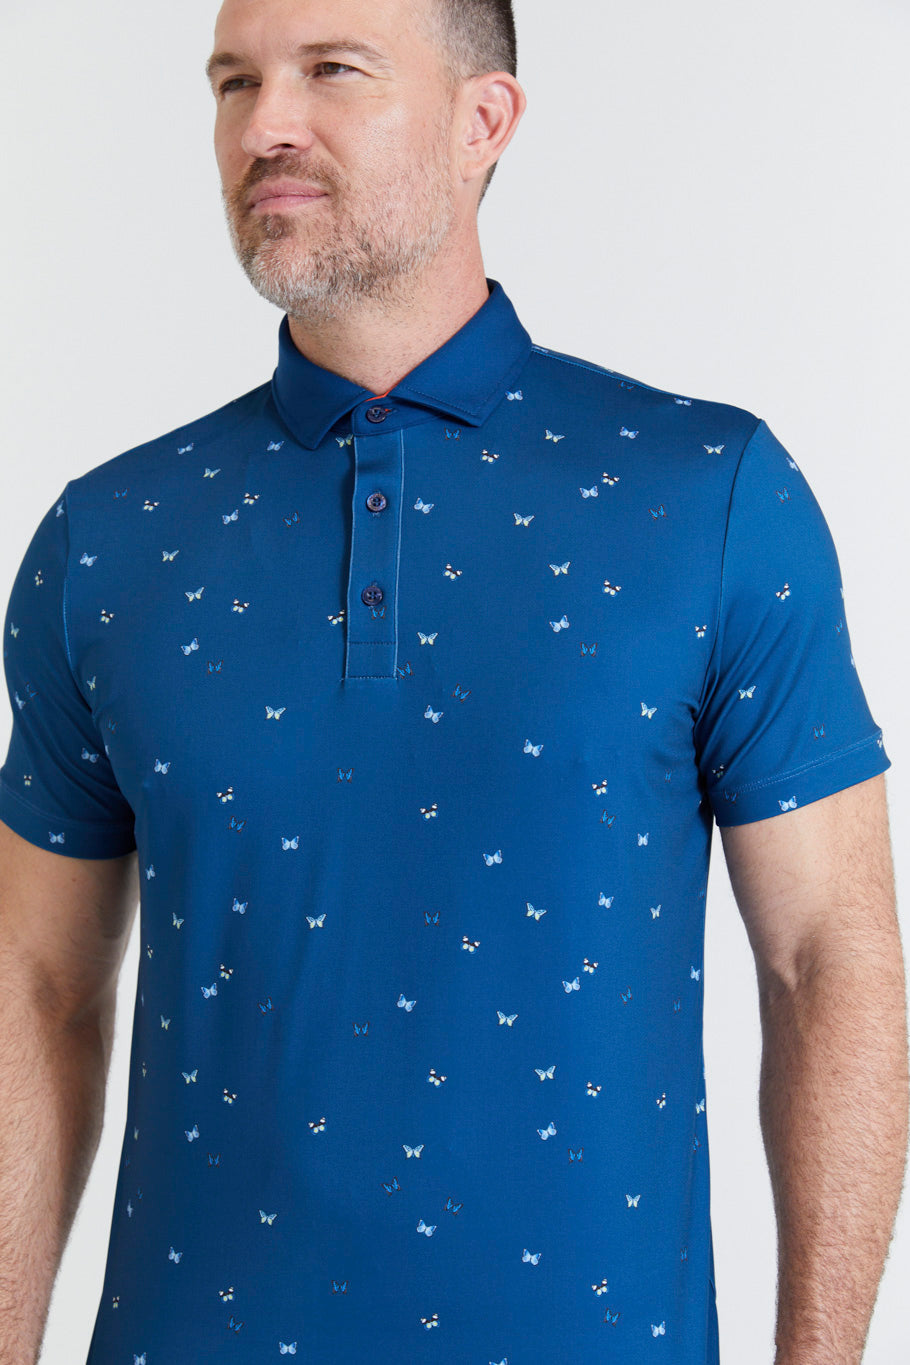 Image of the fullerton polo in admiral ss23